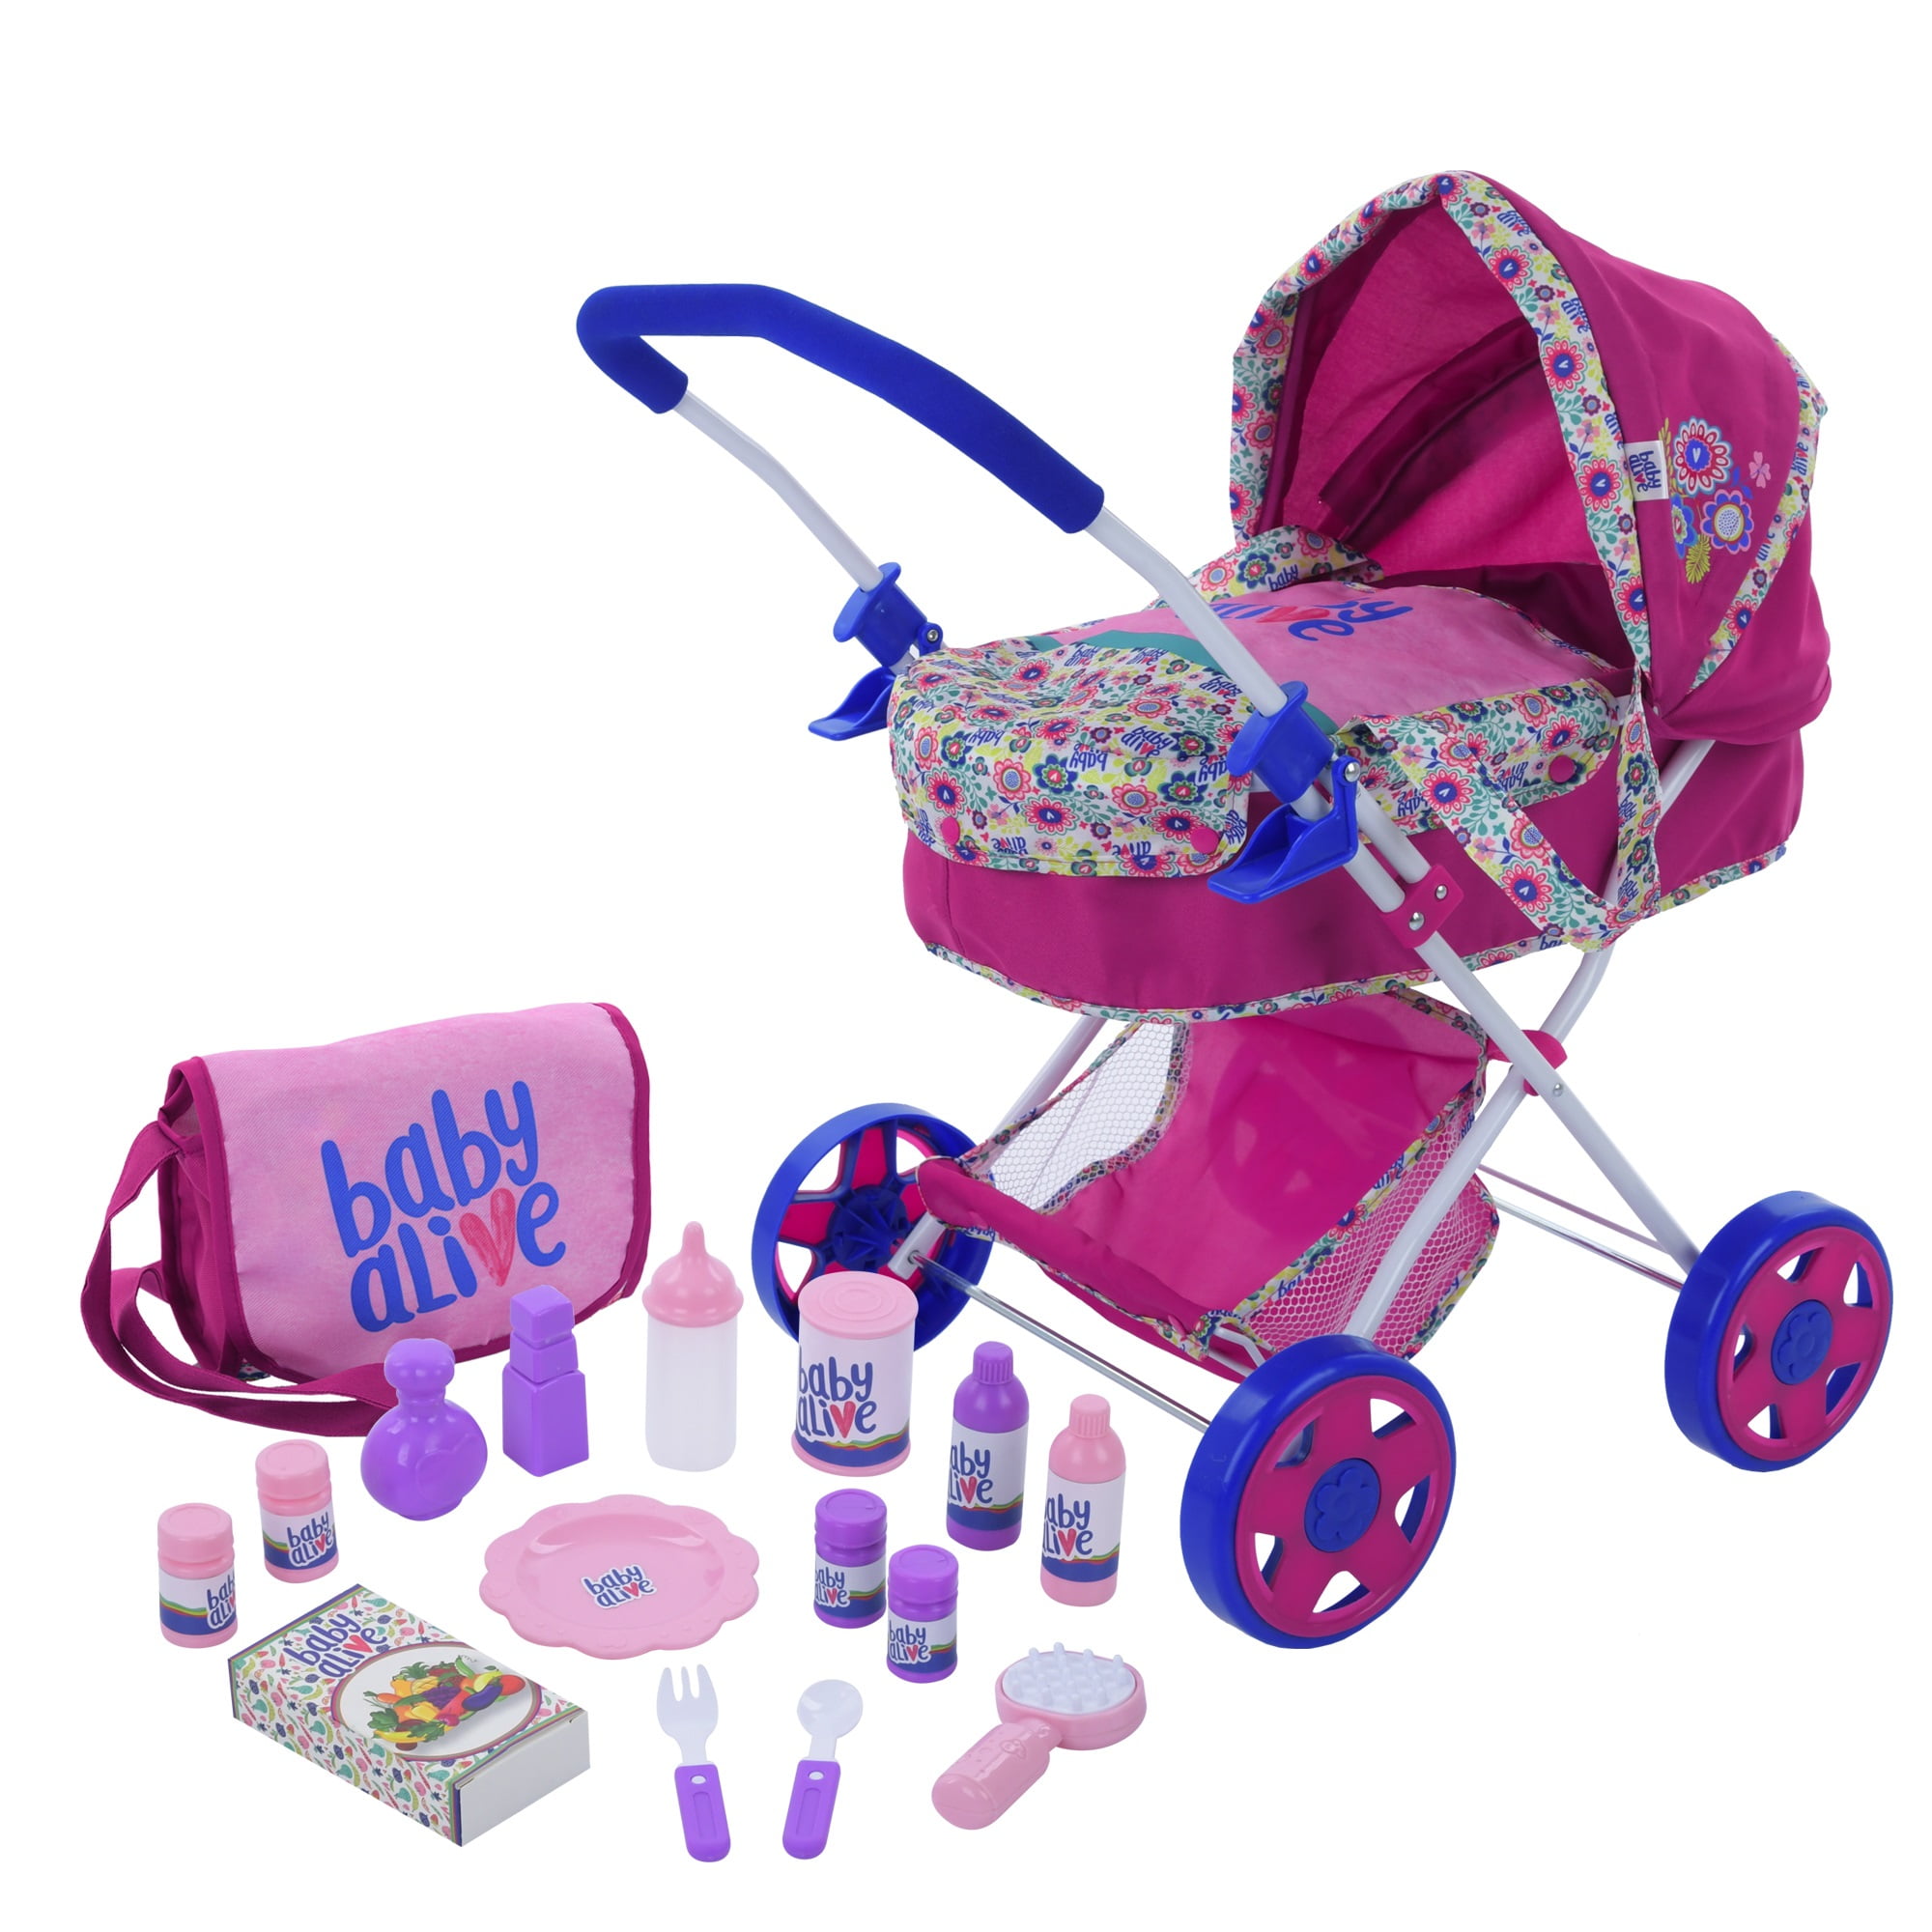 Girls Toy Game Fit 17" Baby Doll Play and Go Pram & Basket & Carry Bag Fun Gift 